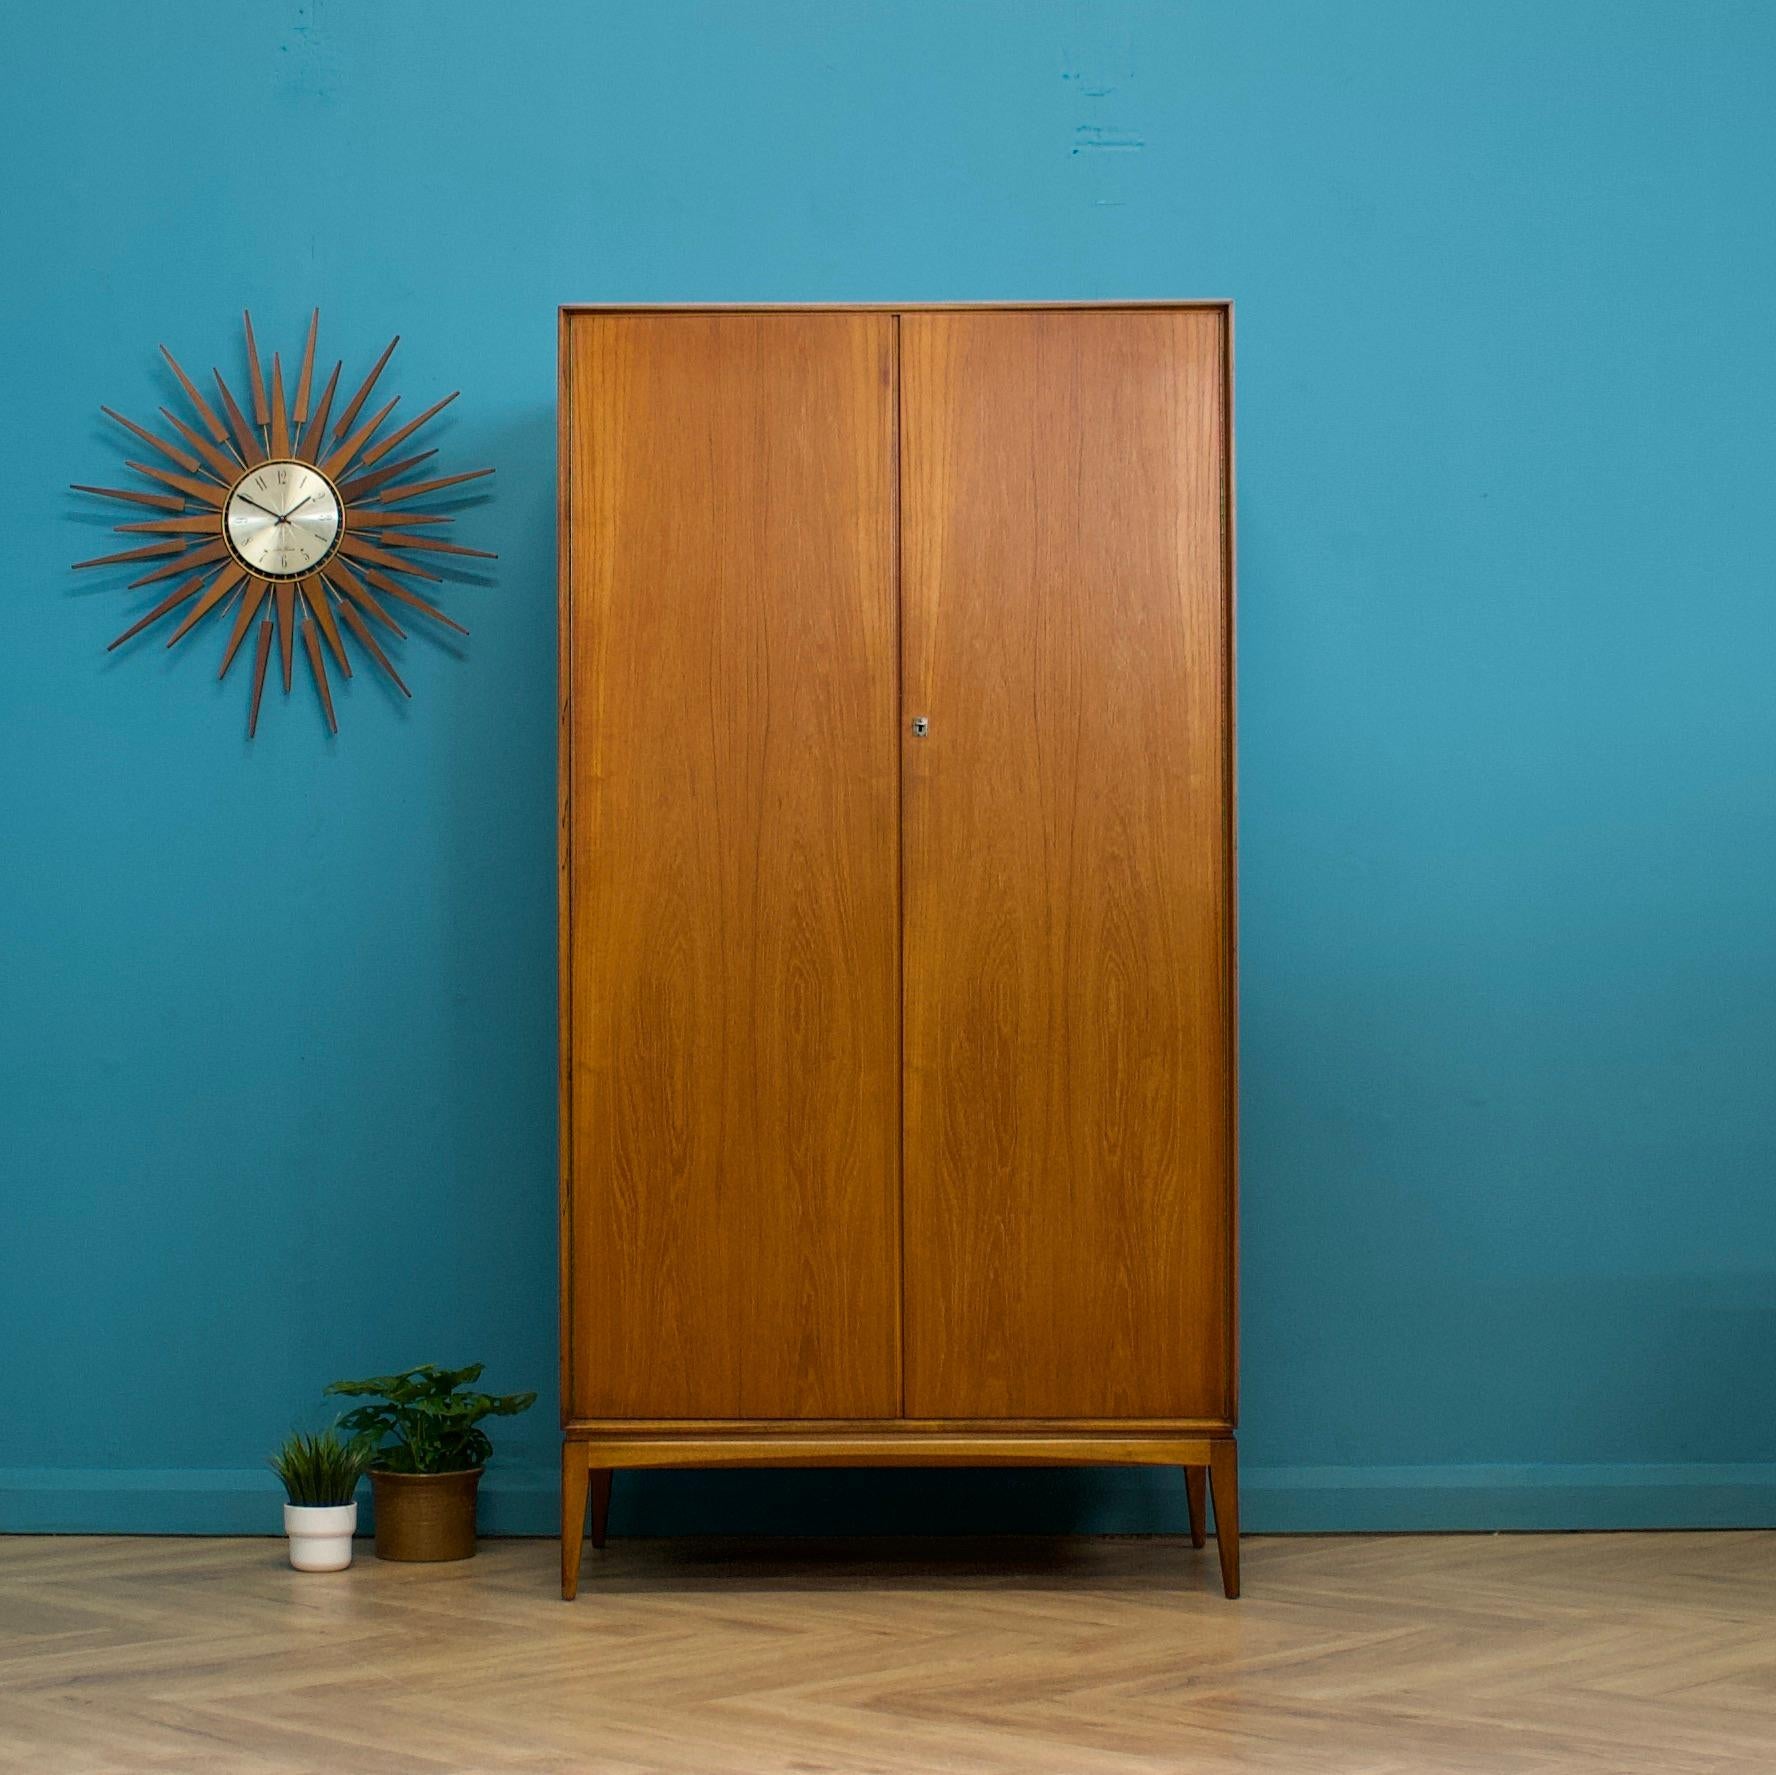 A freestanding double door teak wardrobe from McIntosh - in the Danish modern style Made during the 1960s Fitted out with a clothes rail and fixed shelving for ample storage.
The style of this wardrobe is minimalist - with it's clean lines, handless